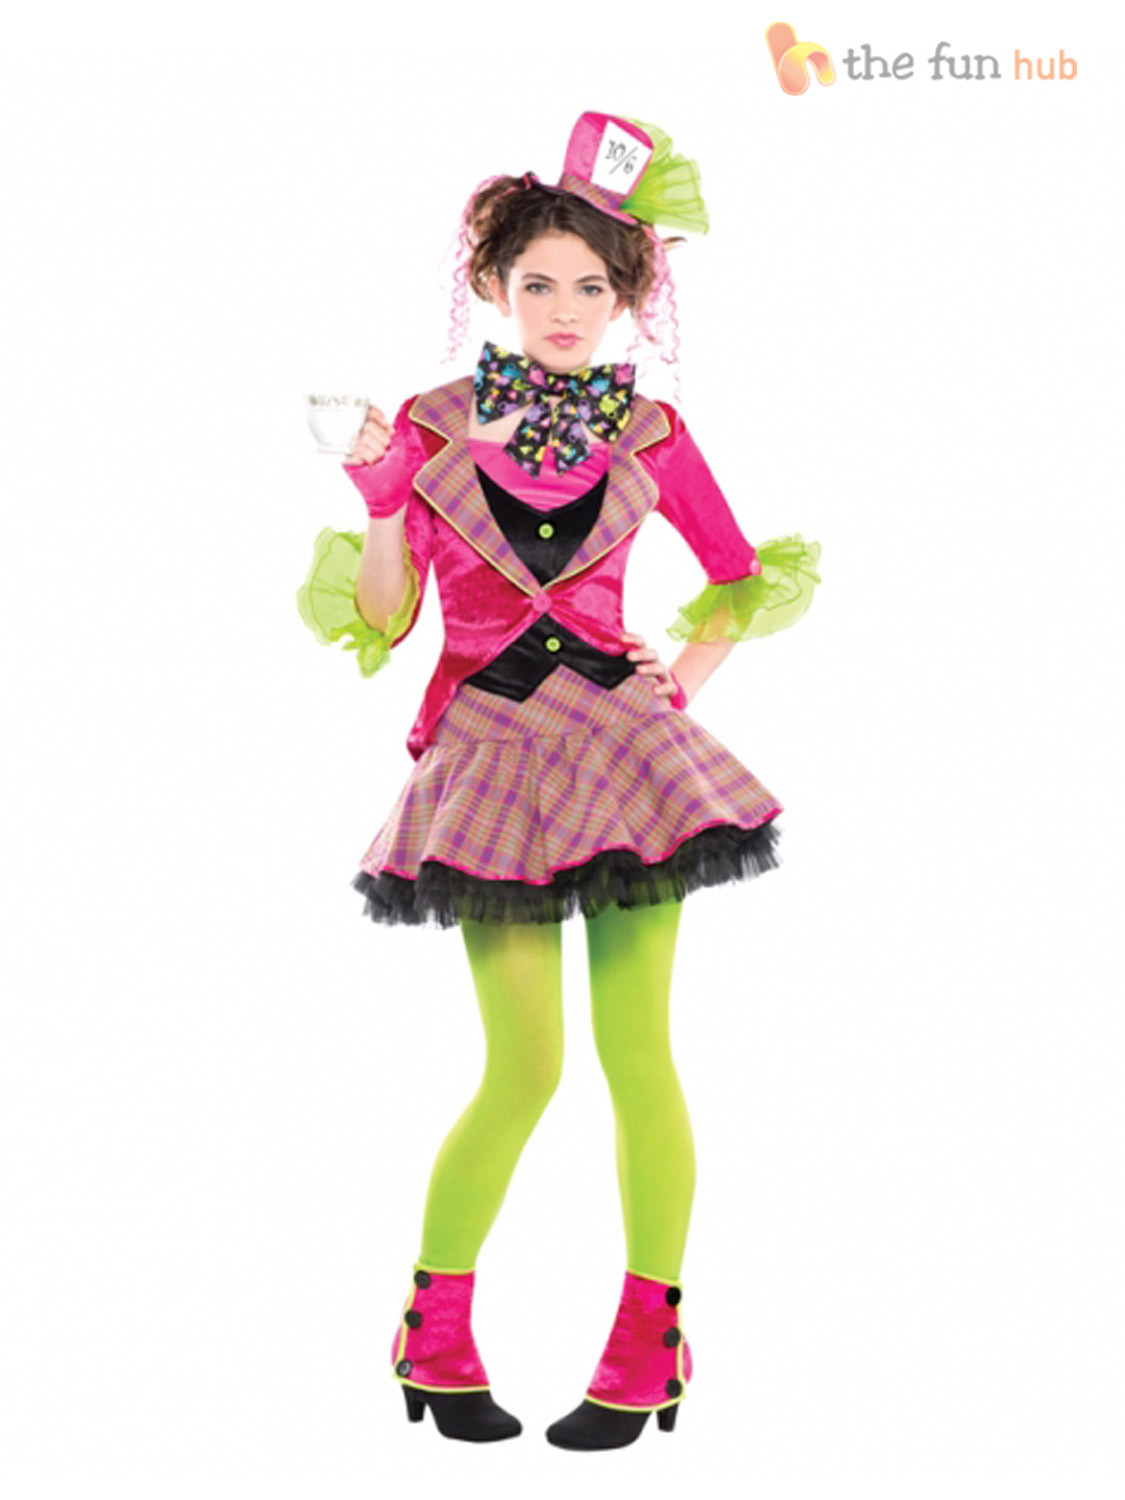 Mad Hatters Tea Party Costume Ideas
 Girls Mad Hatter Costume Tea Party Teen Fancy Dress Book